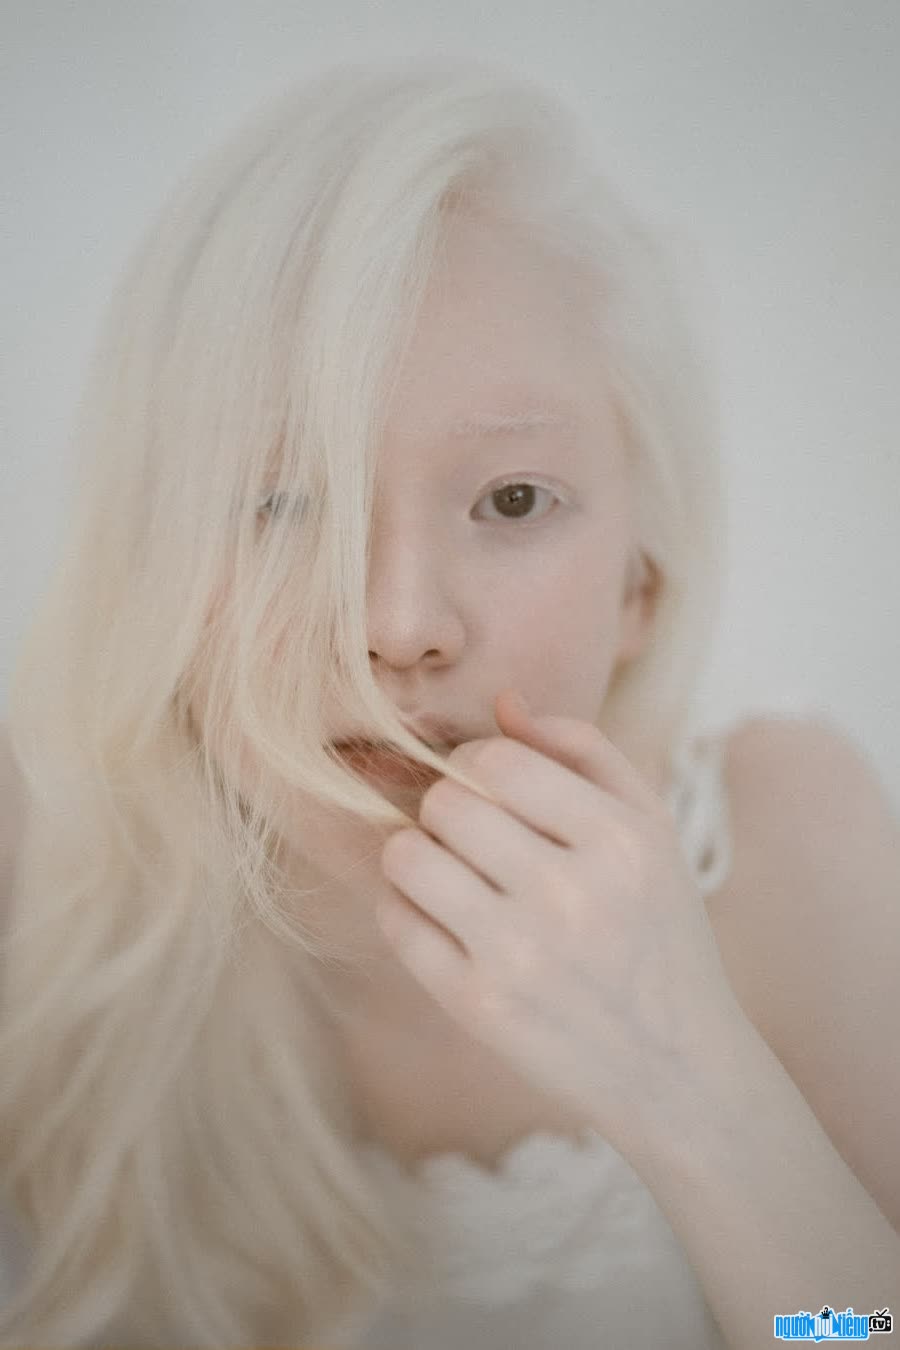 Ngo Thuy Quynh is a girl with albinism